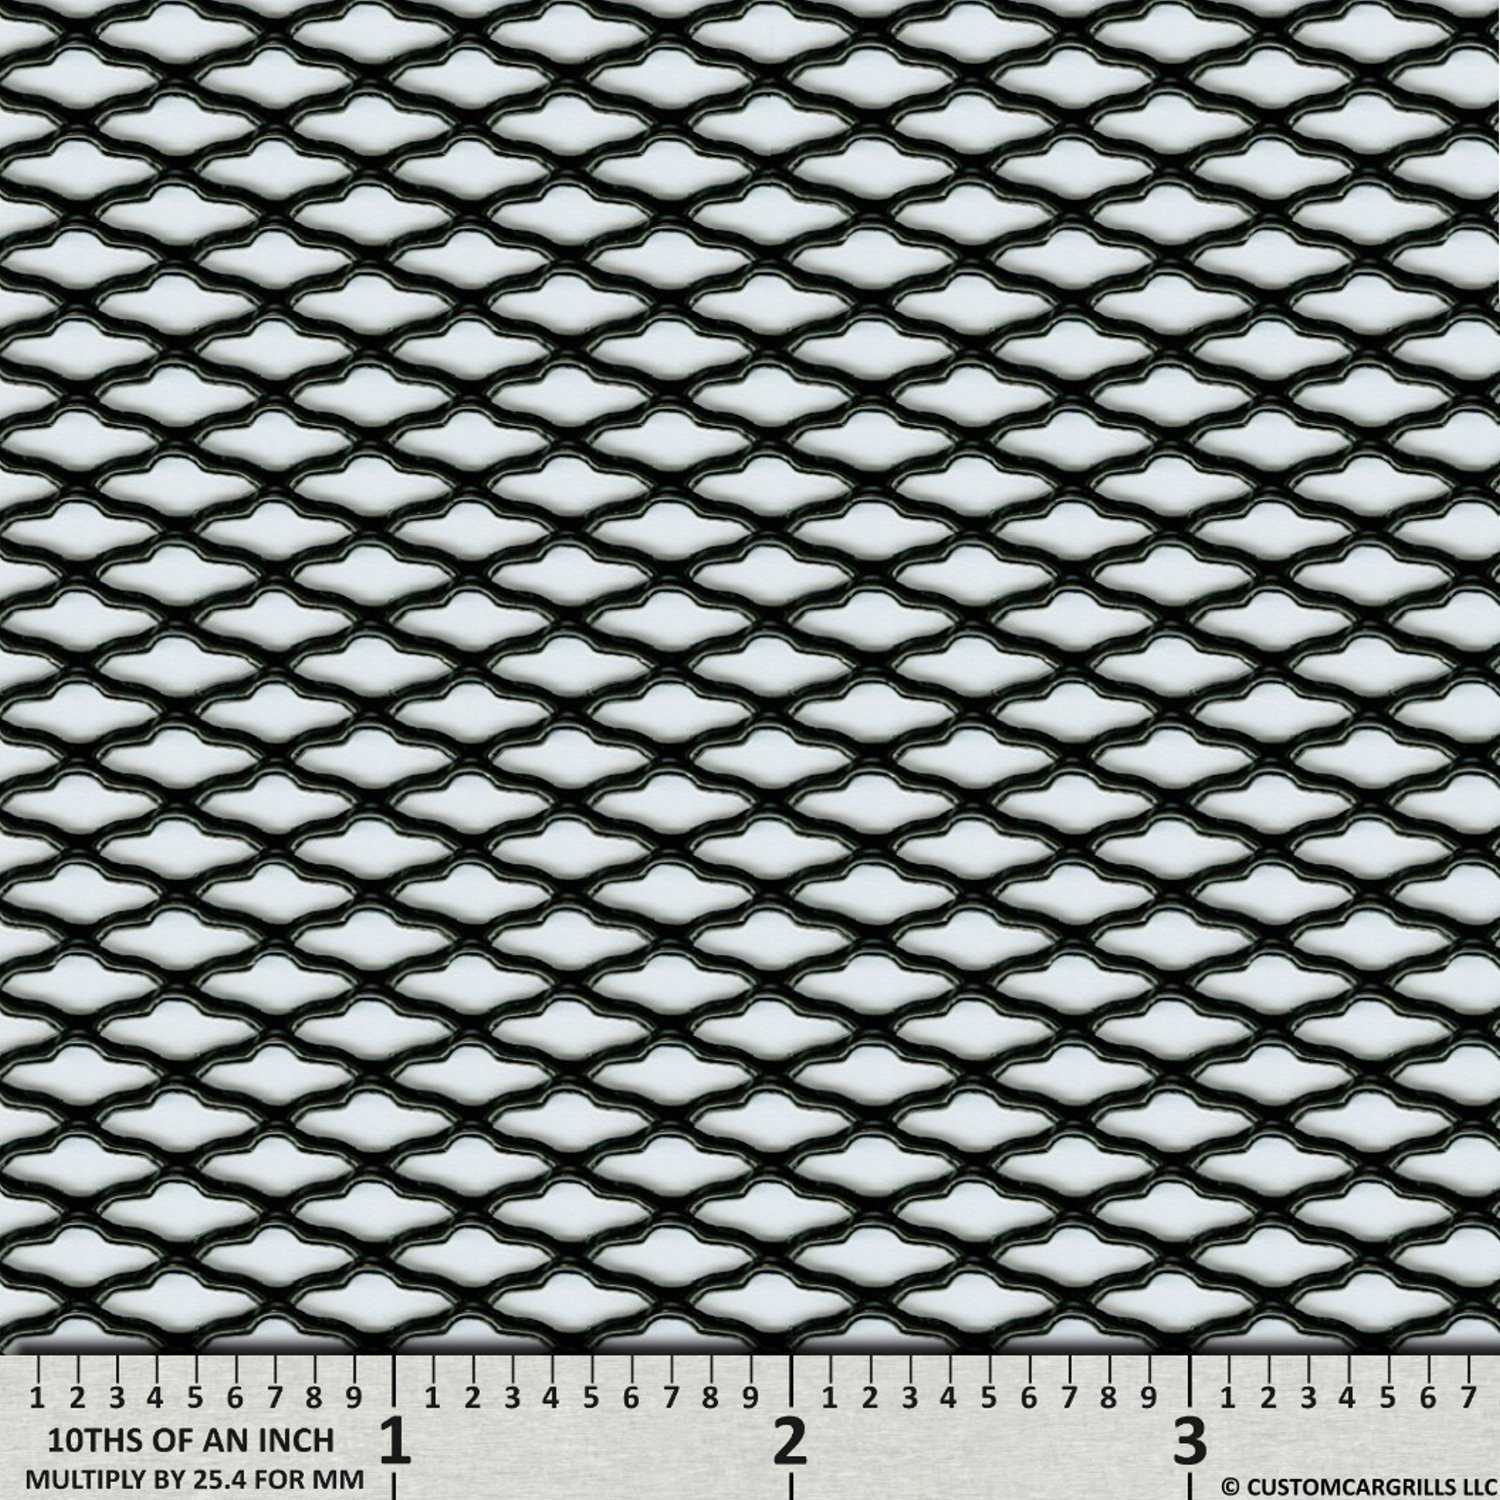 6in. x 36in. Oval ZigZag Grill Mesh Sheet - Gloss Black #1